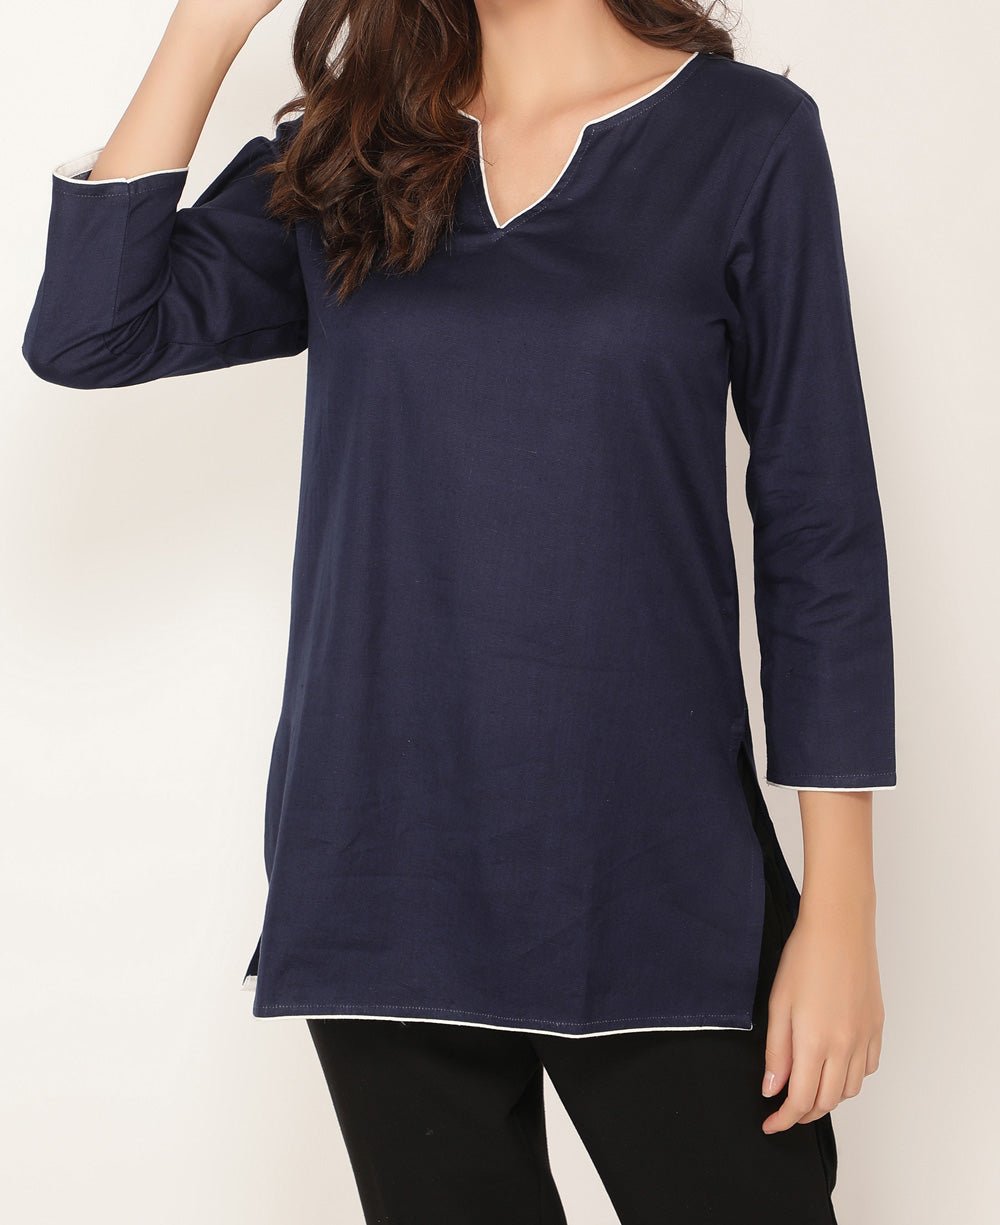 Navy Blue and White Cotton Tunic Top - Shirts & Tops S